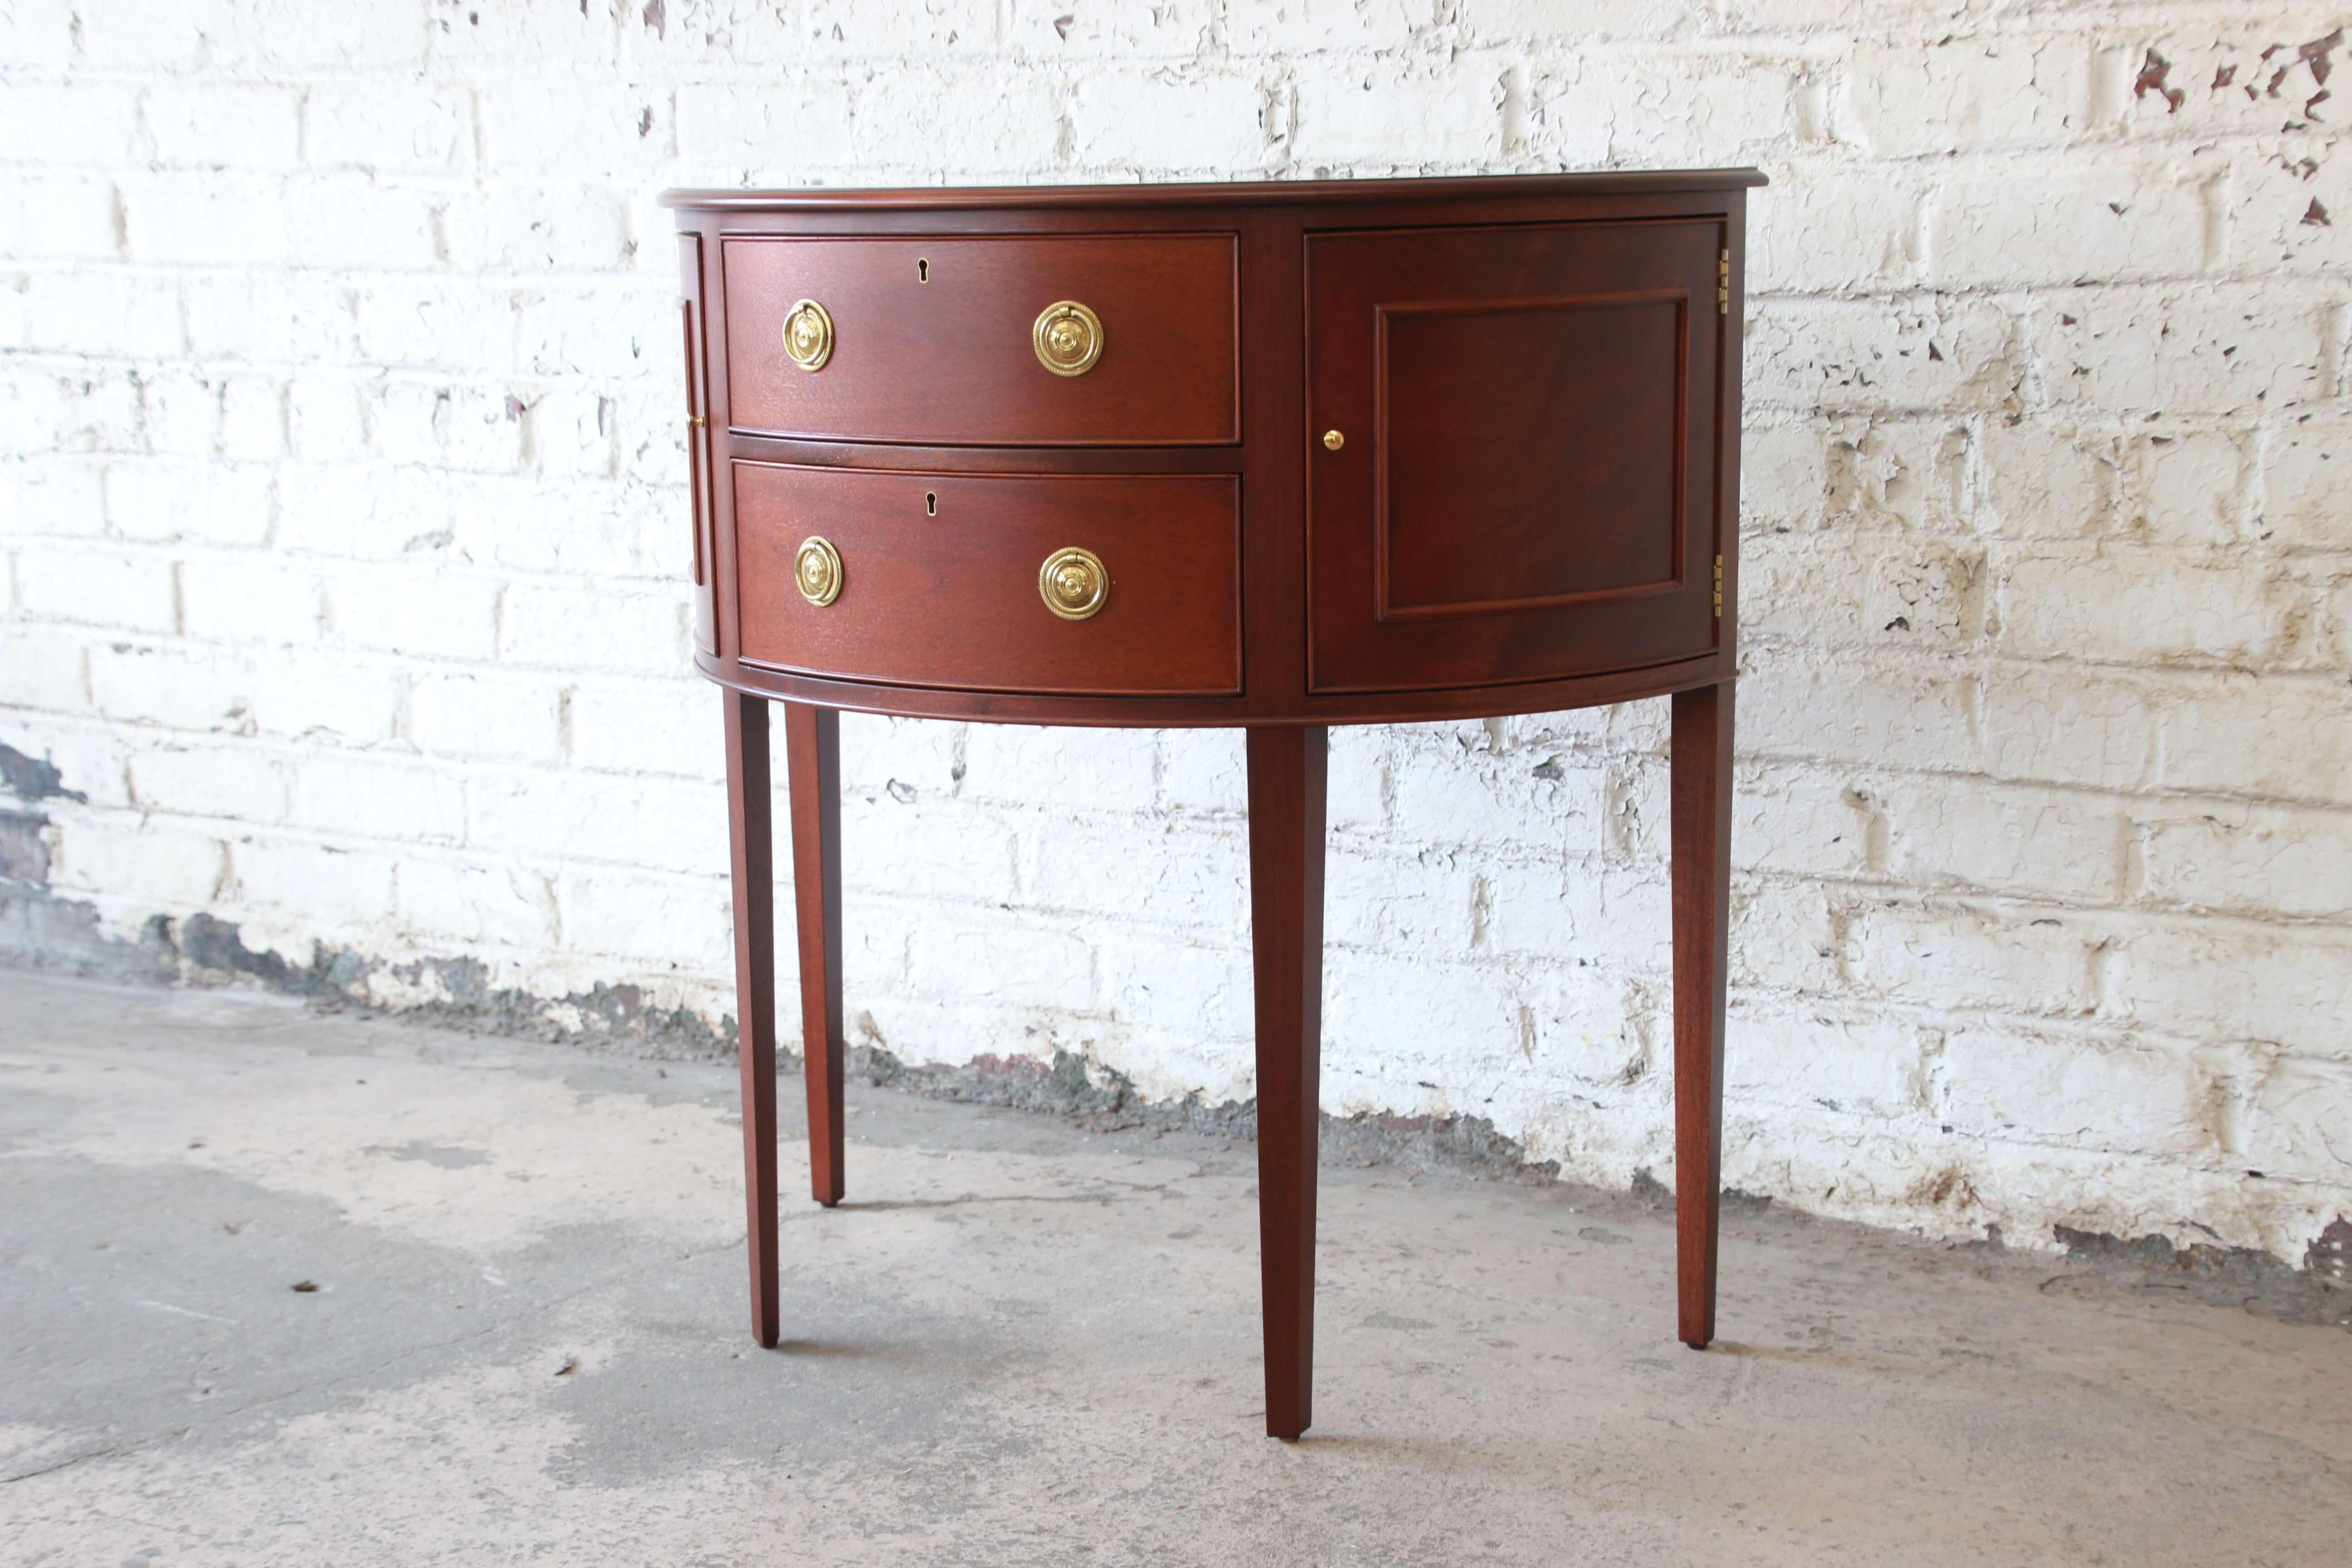 Offering a very nice mahogany demilune cabinet or sideboard by Baker Furniture. The piece has two large centre drawers that open and close smoothly with nice brass hardware. On each side of the drawers there are cabinet doors that open for